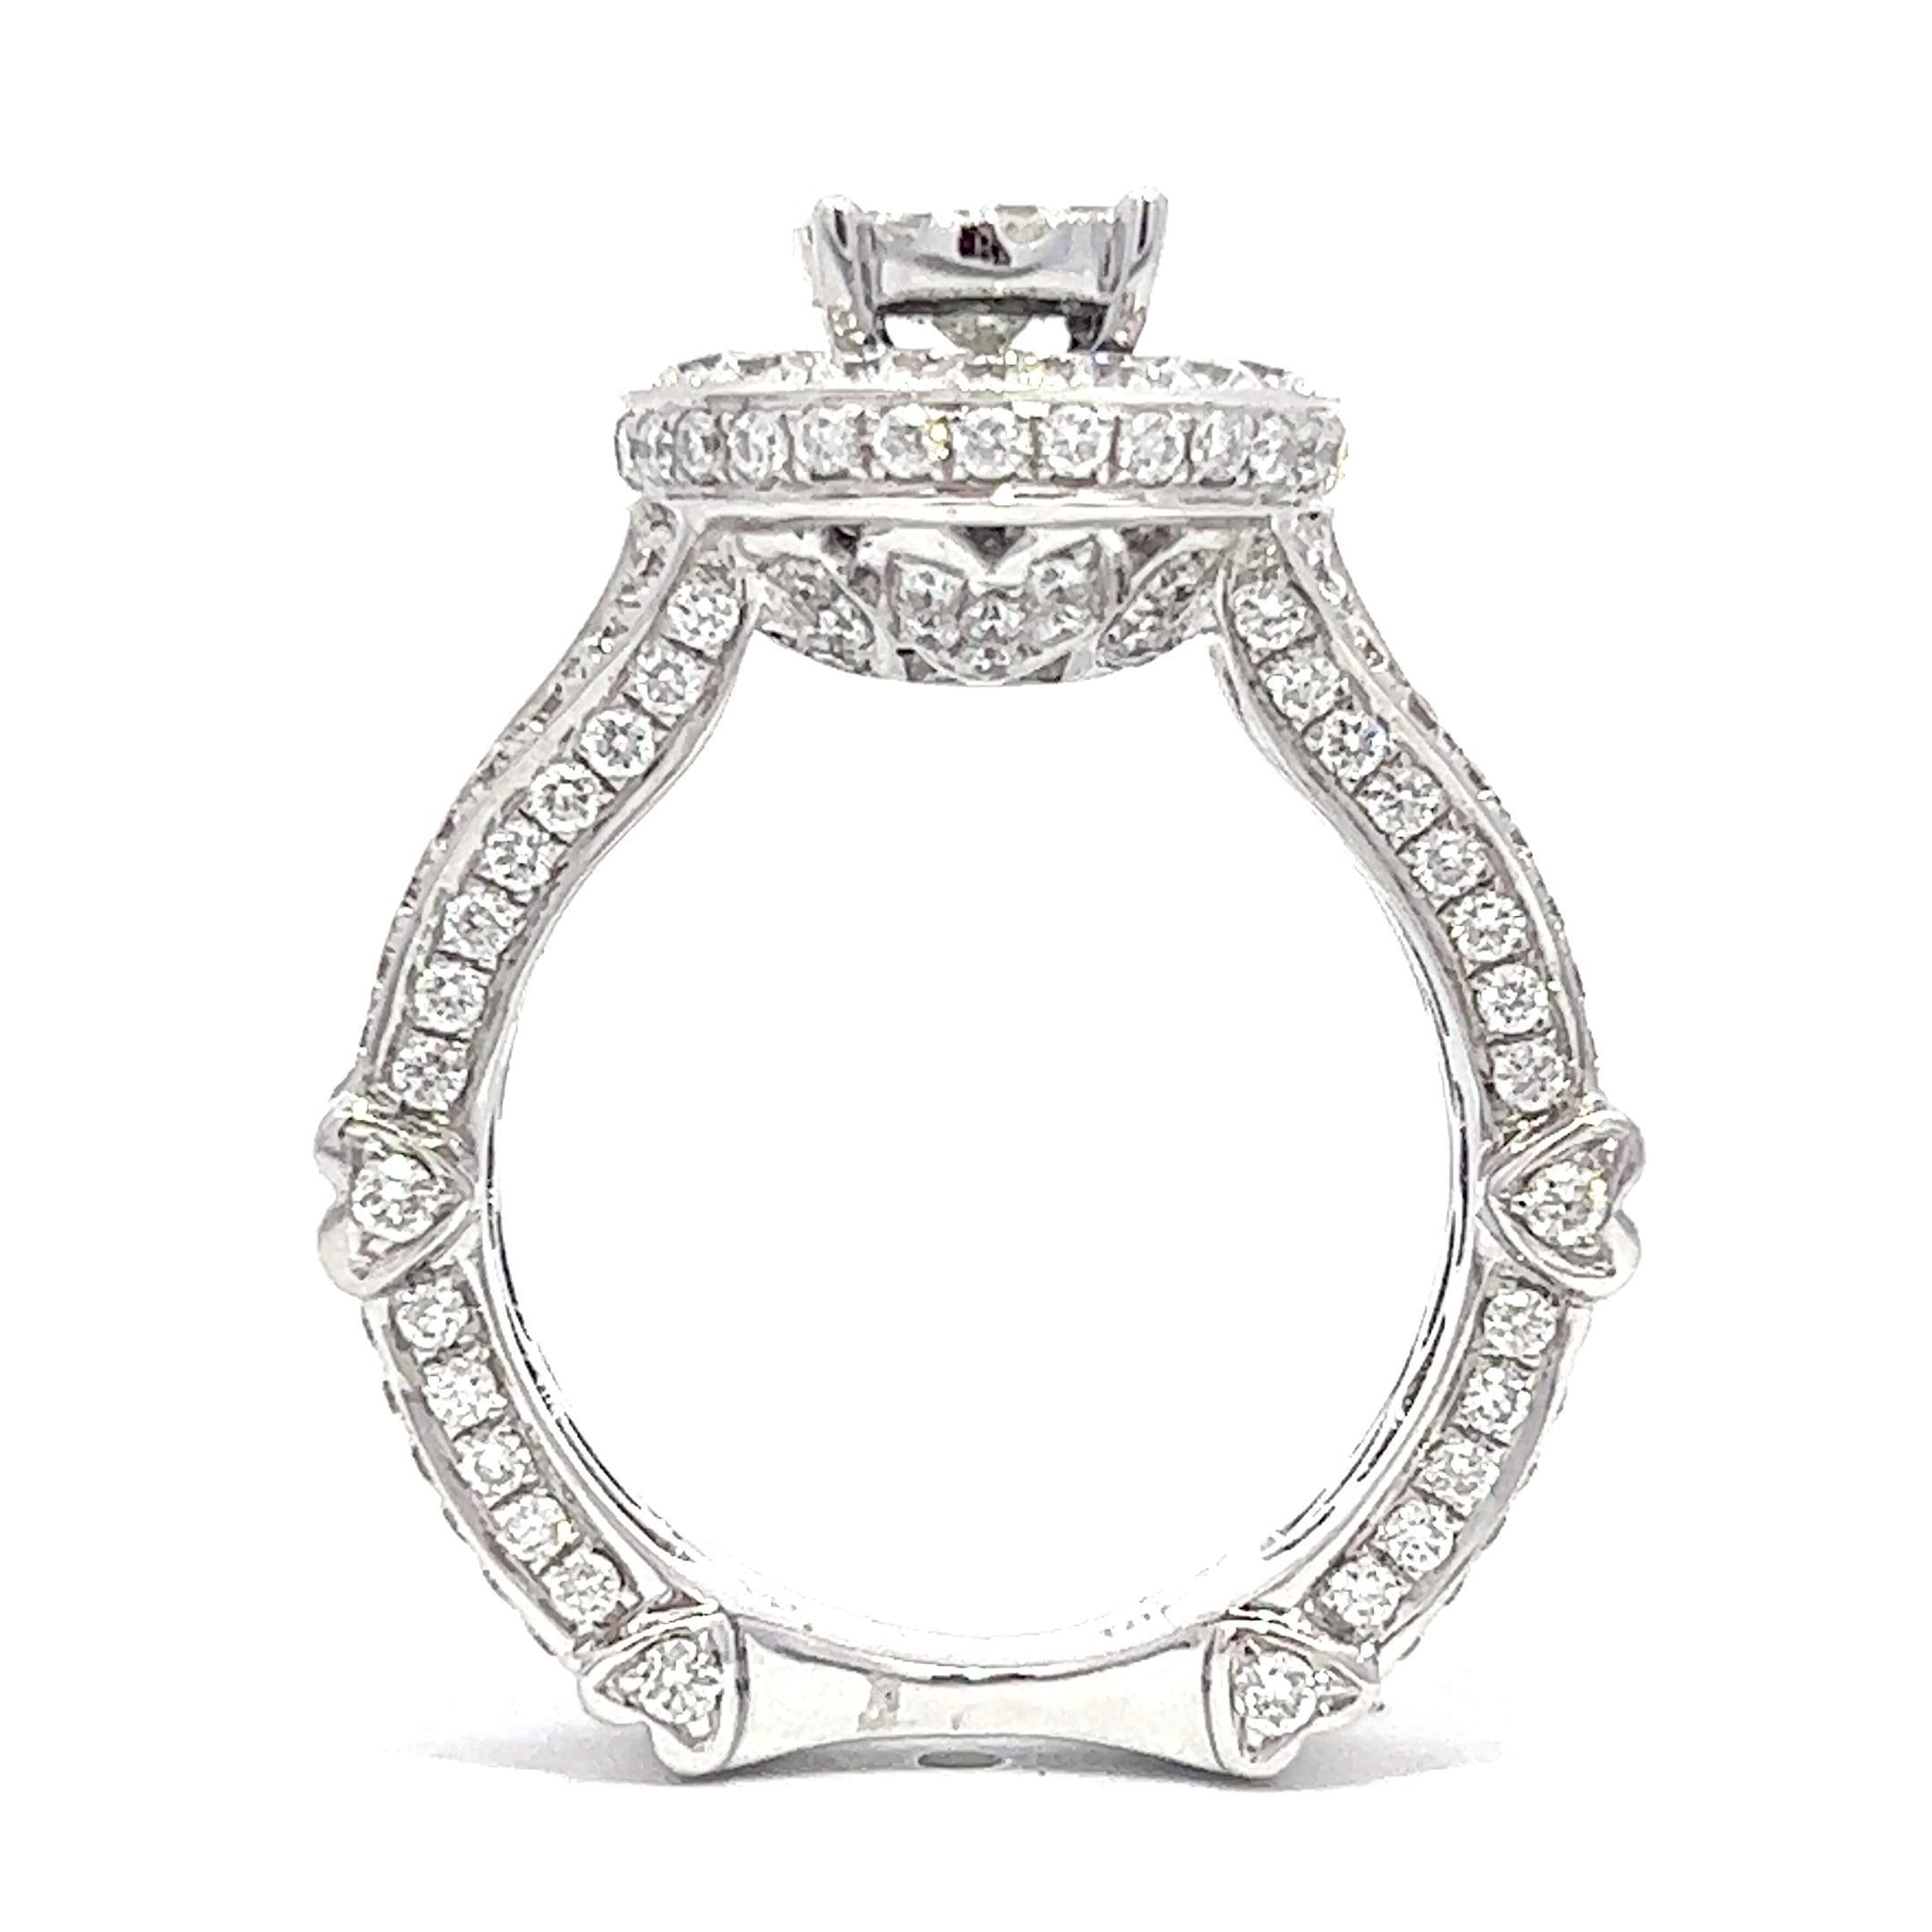 This 18k white gold engagement ring boasts a stunning 2.90ct equivalent of round brilliant diamonds in g-h color and vs2-si clarity.